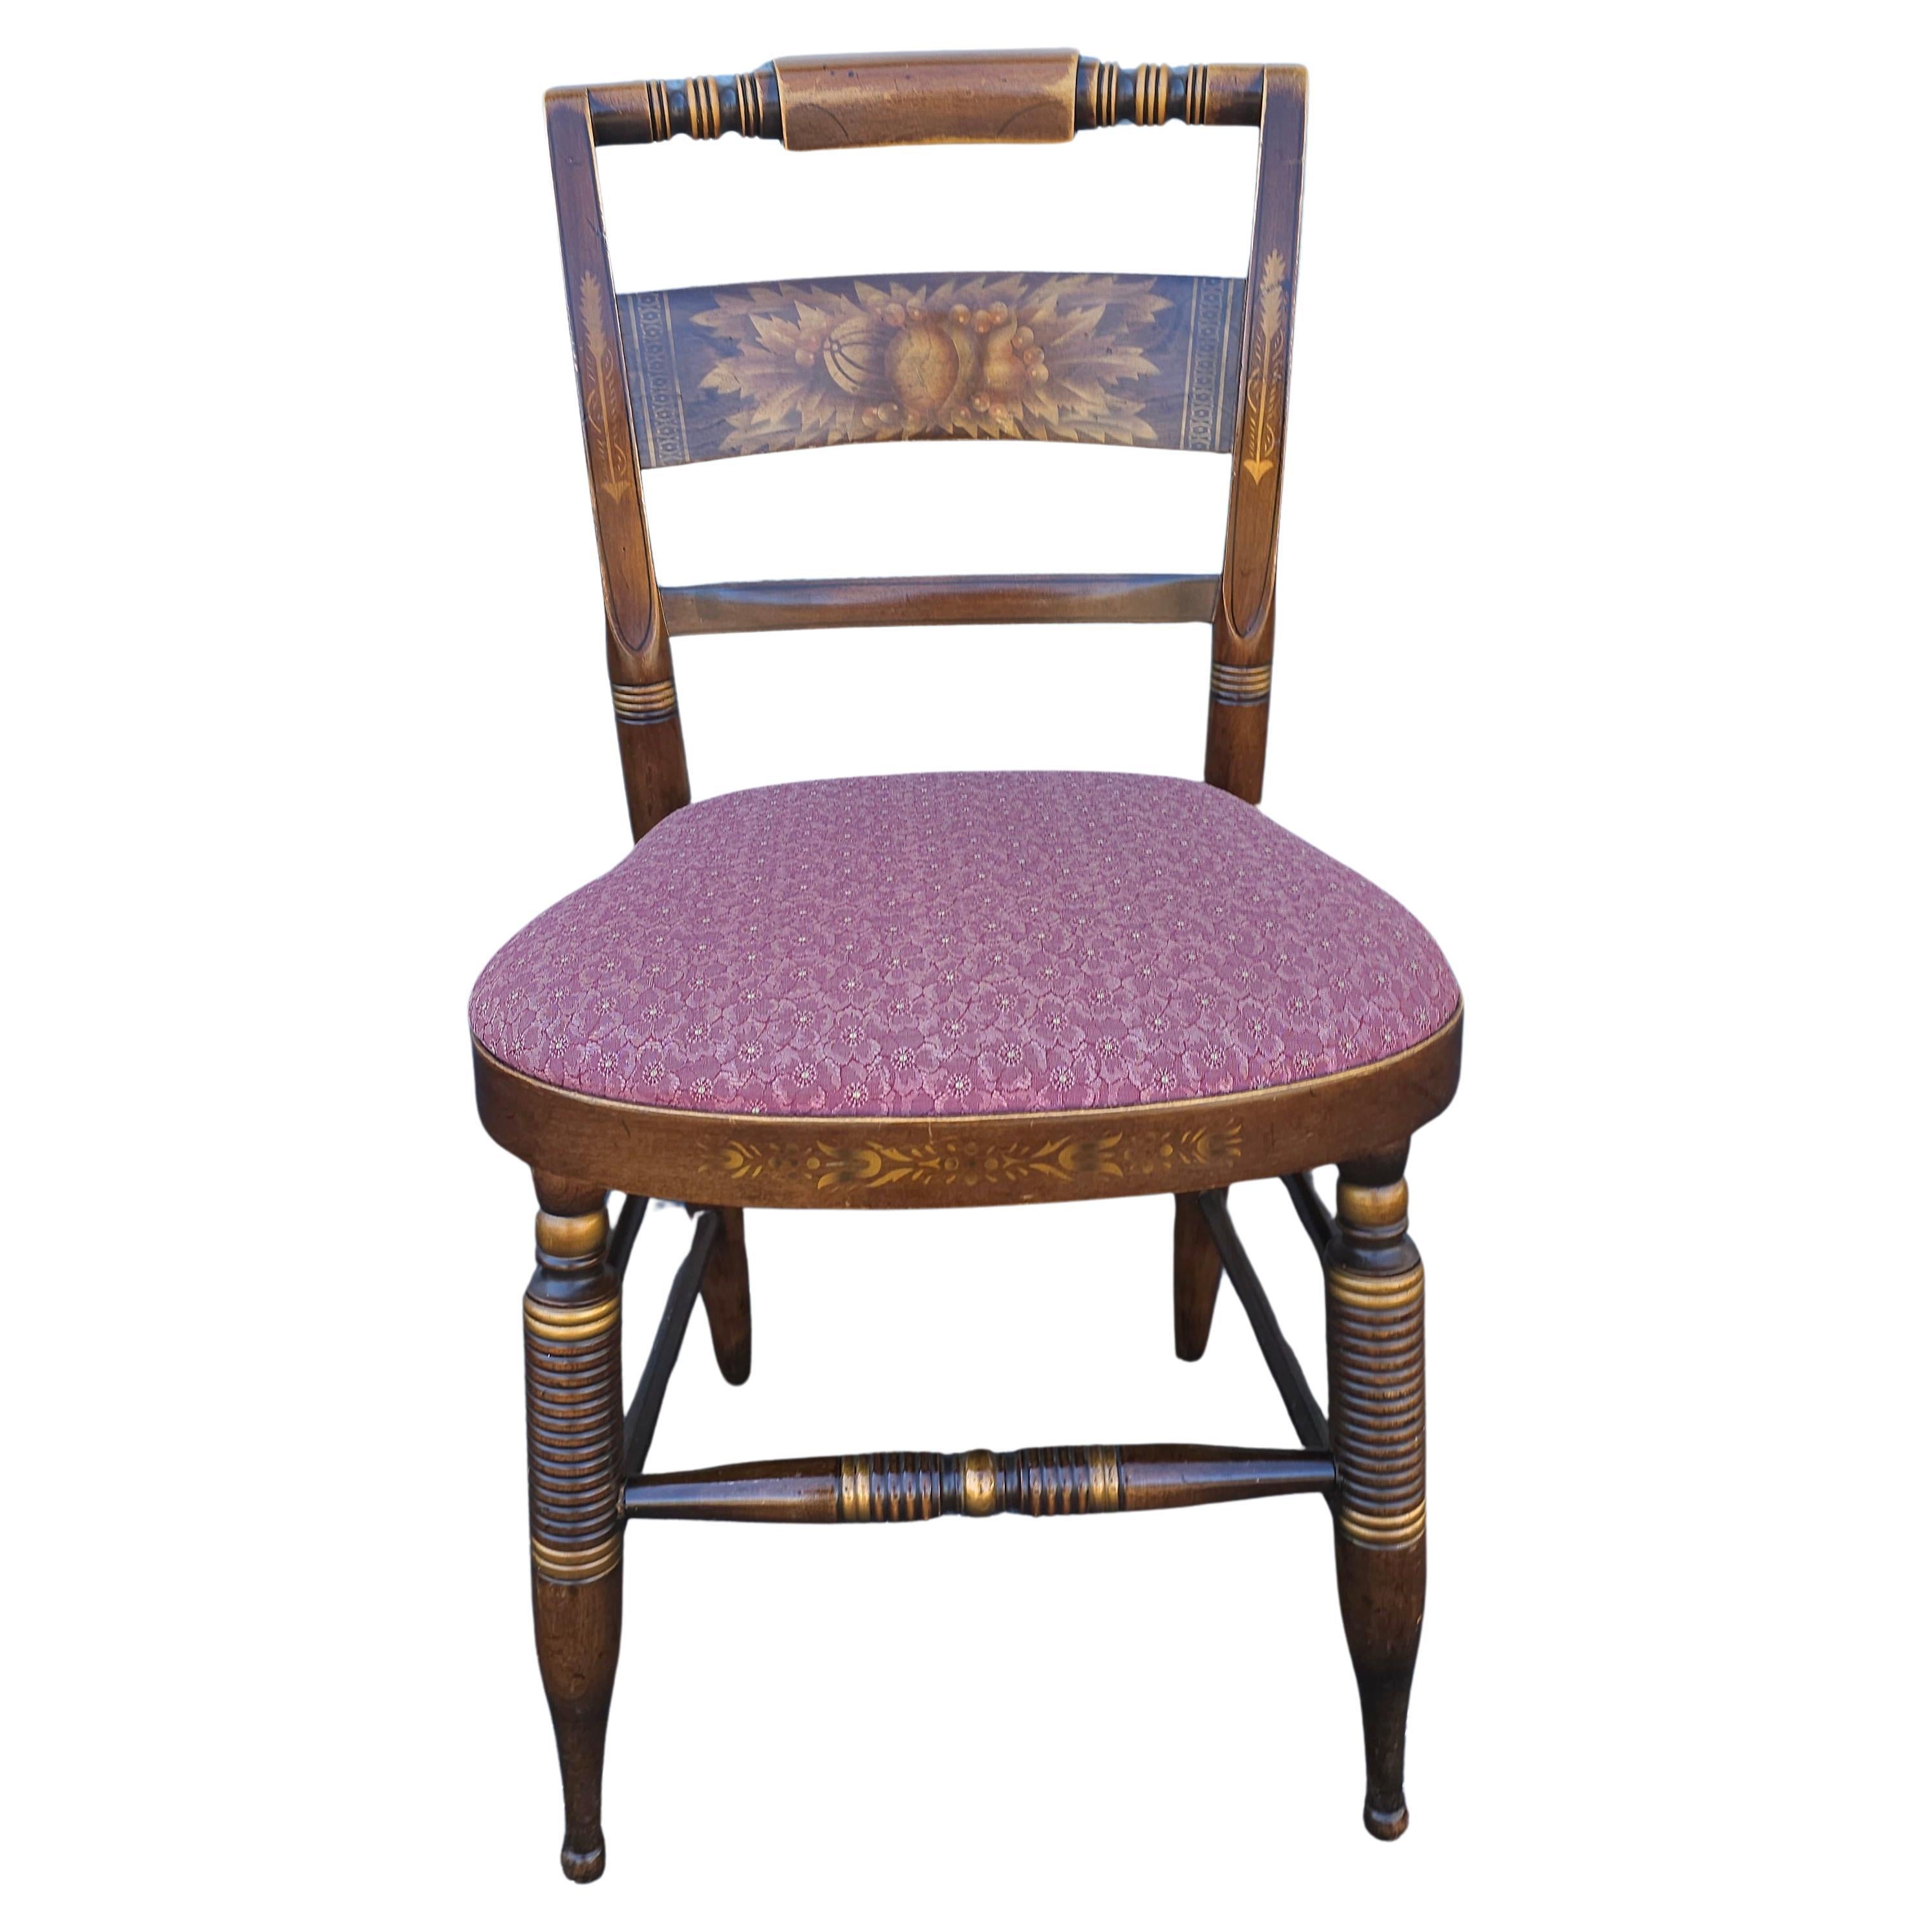 A Late 20th Century Lambert Hitchcock Partial Gilt and Decorated, Upholstered Seat Side Chair. Measures 18